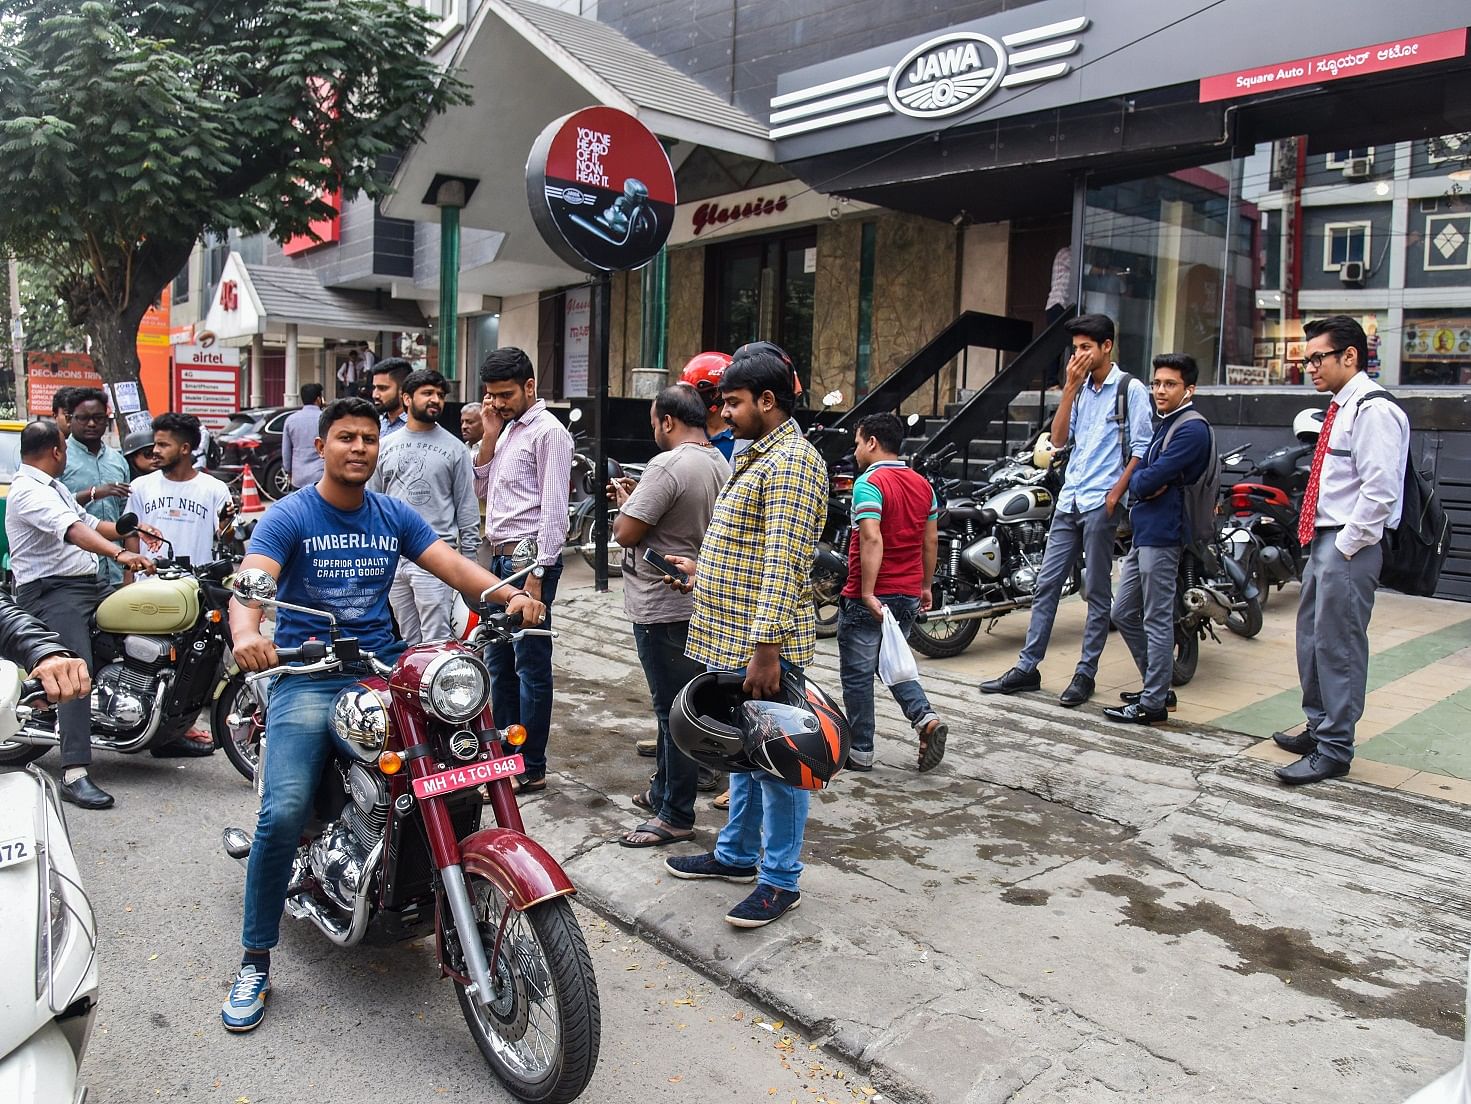 Bike enthusiasts test ride the new Jawa at the Koramangala outlet. DH PHOTO BY S K DINESH